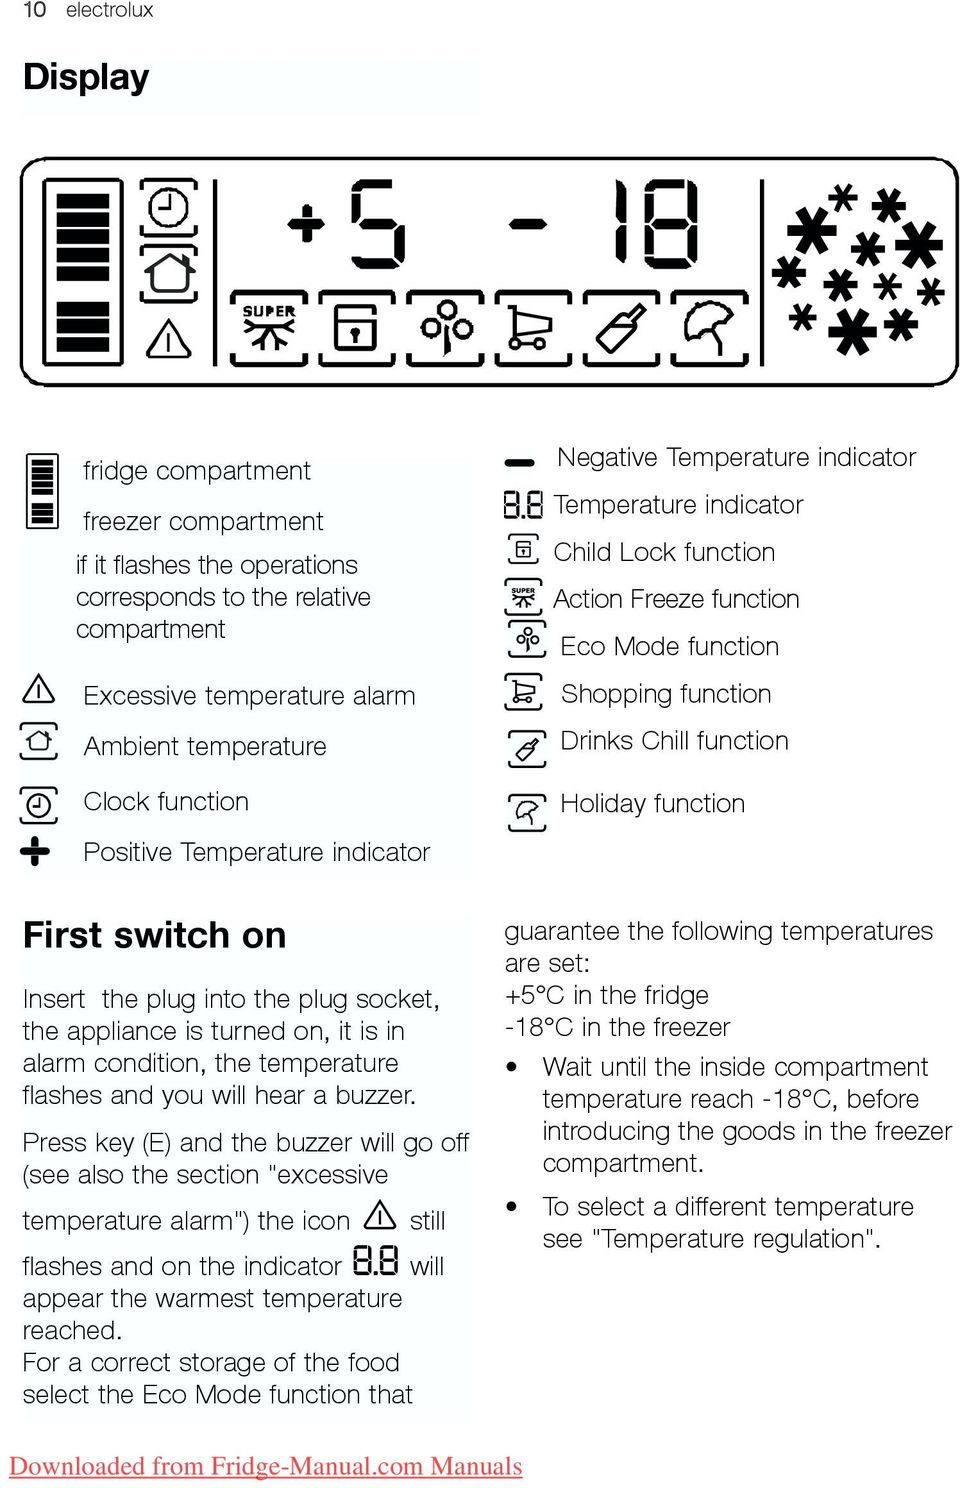 Press key (E) and the buzzer will go off (see also the section "excessive temperature alarm") the icon still flashes and on the indicator will appear the warmest temperature reached.